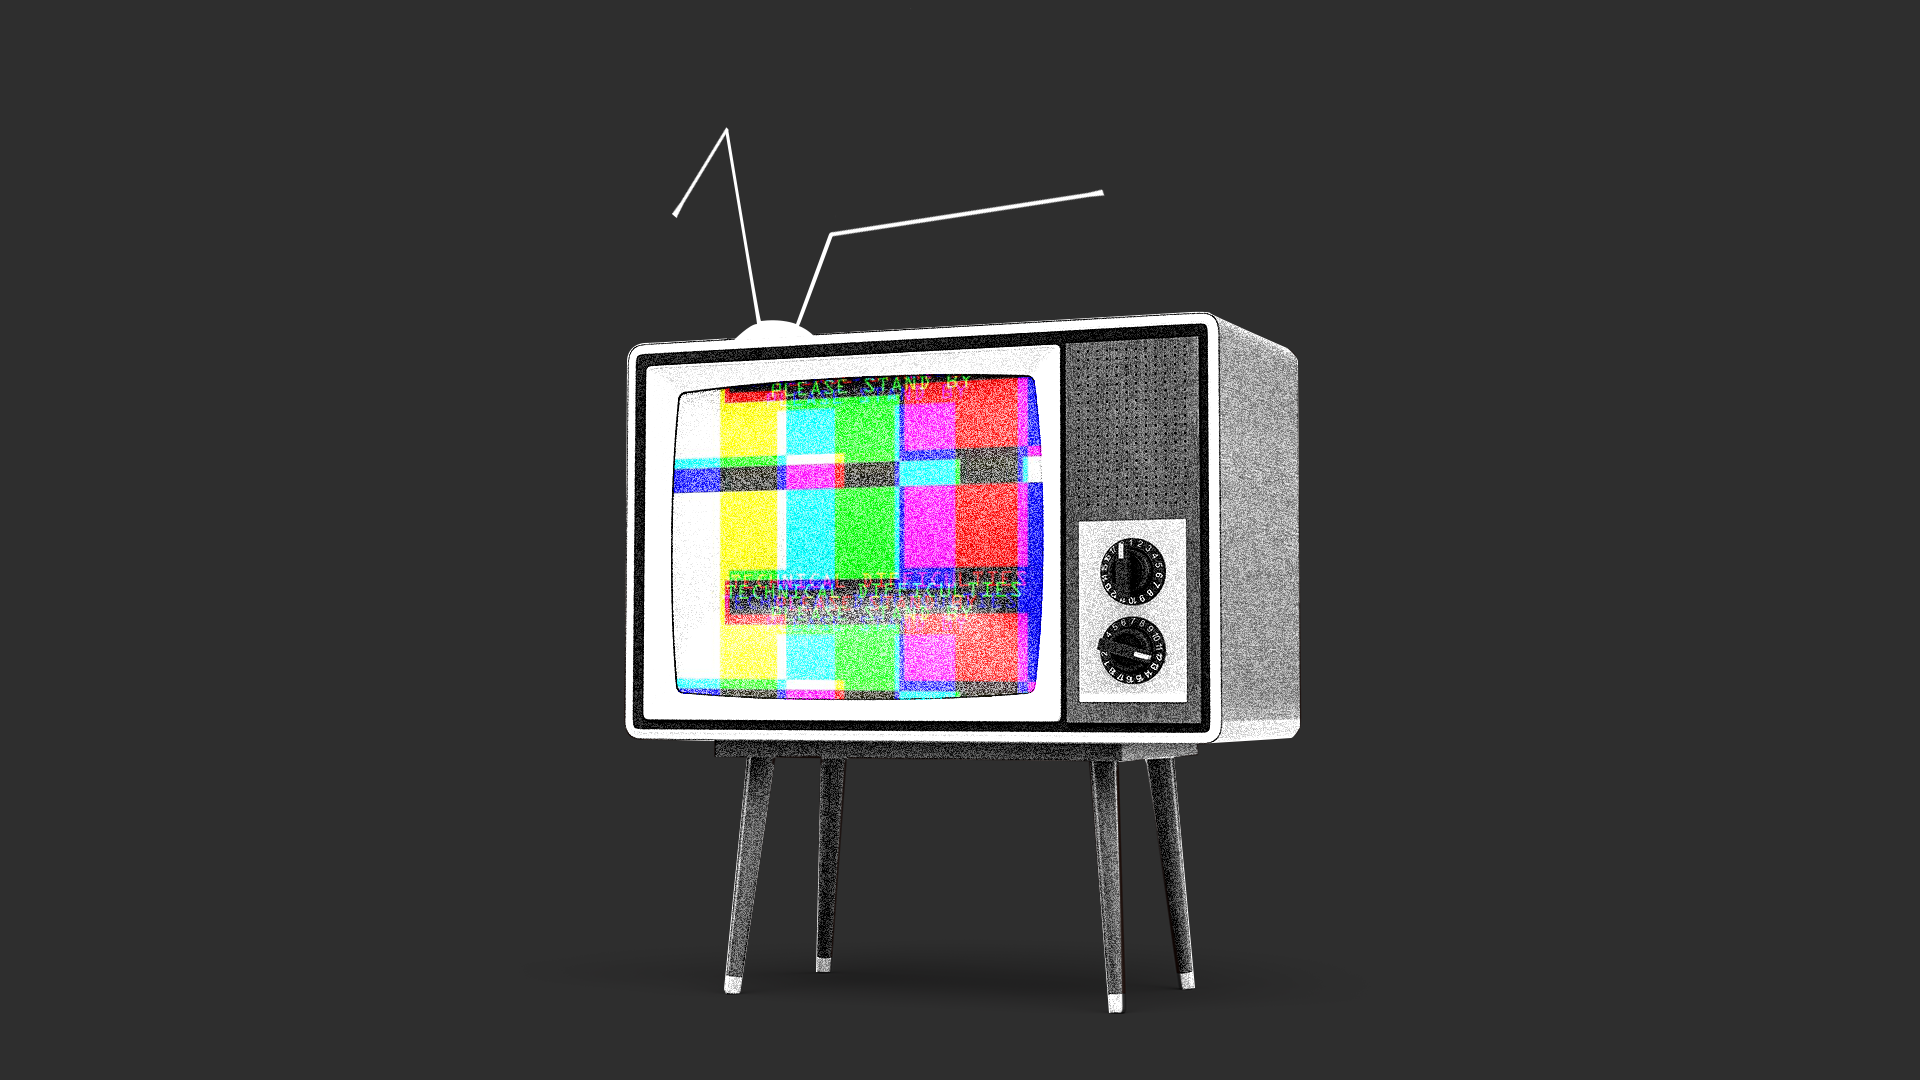 An illustration showing a TV outage.